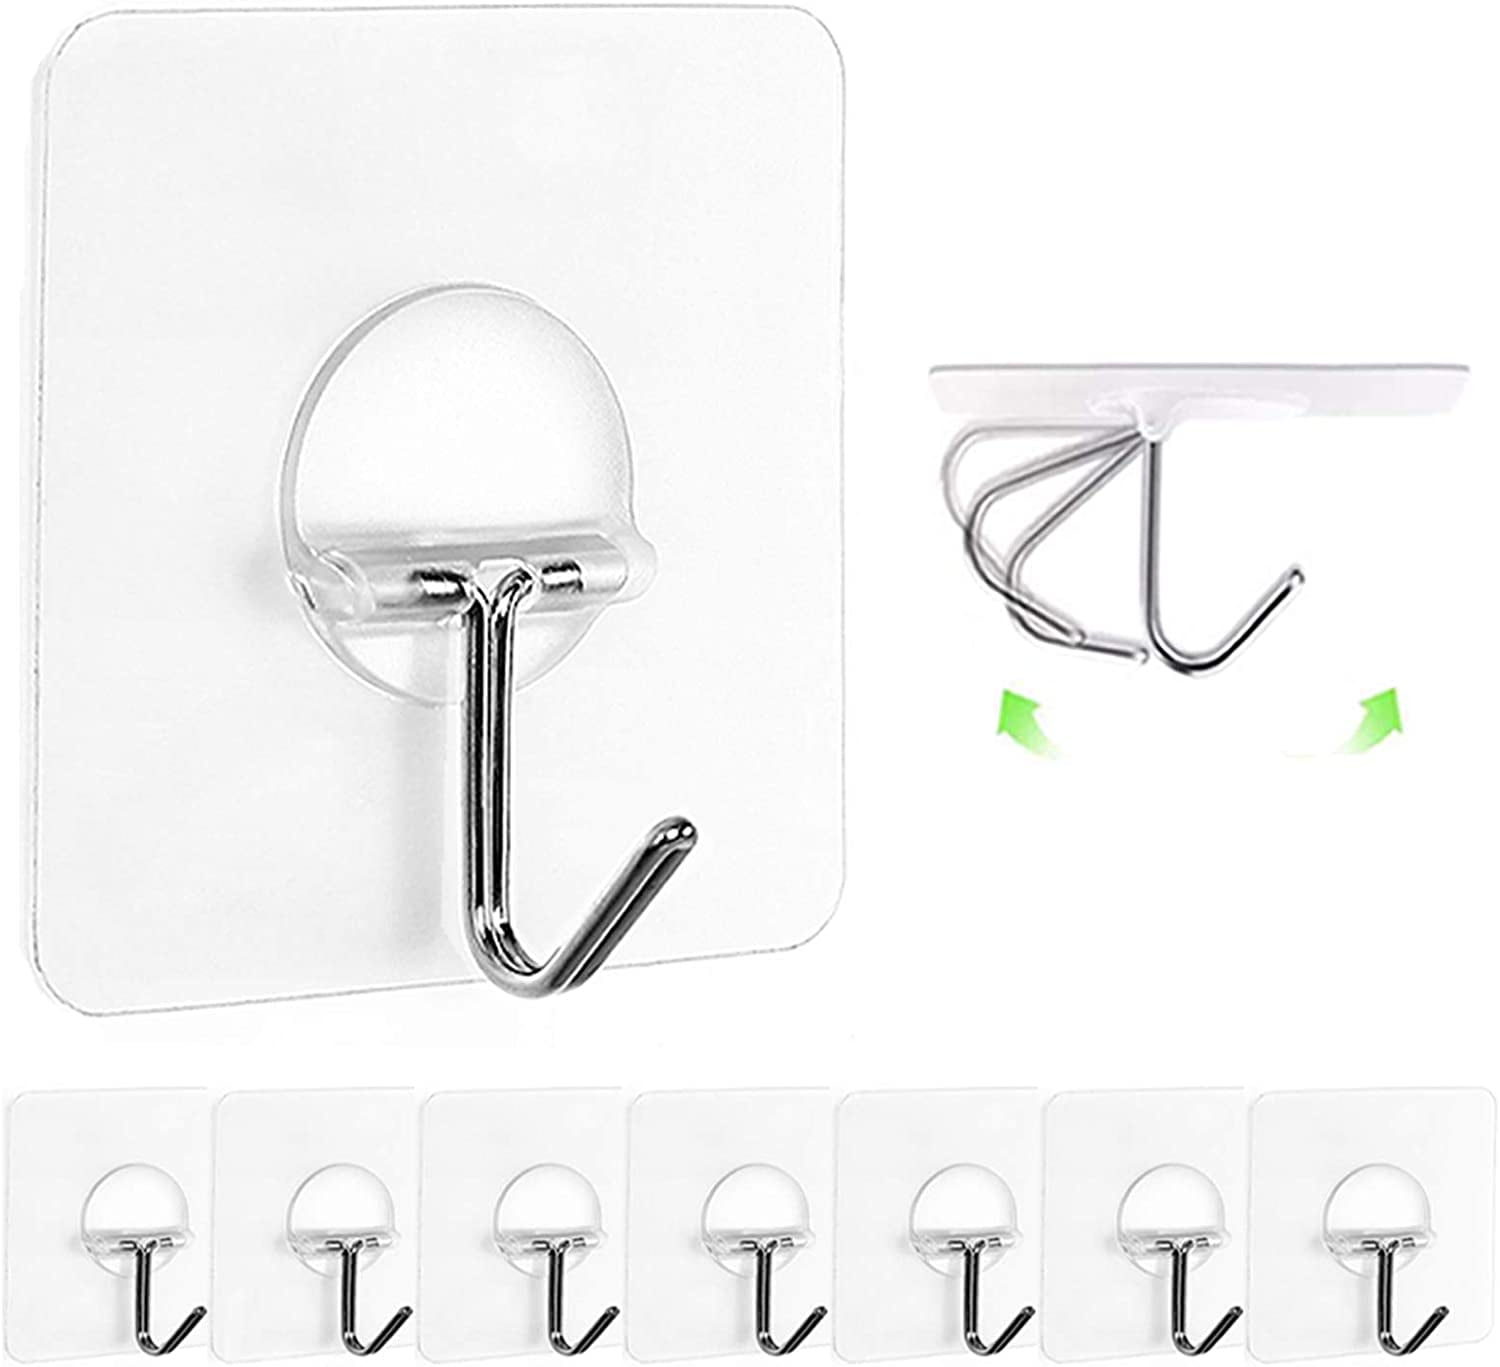 Adhesive Hooks Stainless Steel Wall Towel Coat Clothes Hooks Without Nails  Self Adhesive Holders Hanging Wall Hangers for Bathrooms Kitchen,  1PC/2PCS/4PCS | Wish